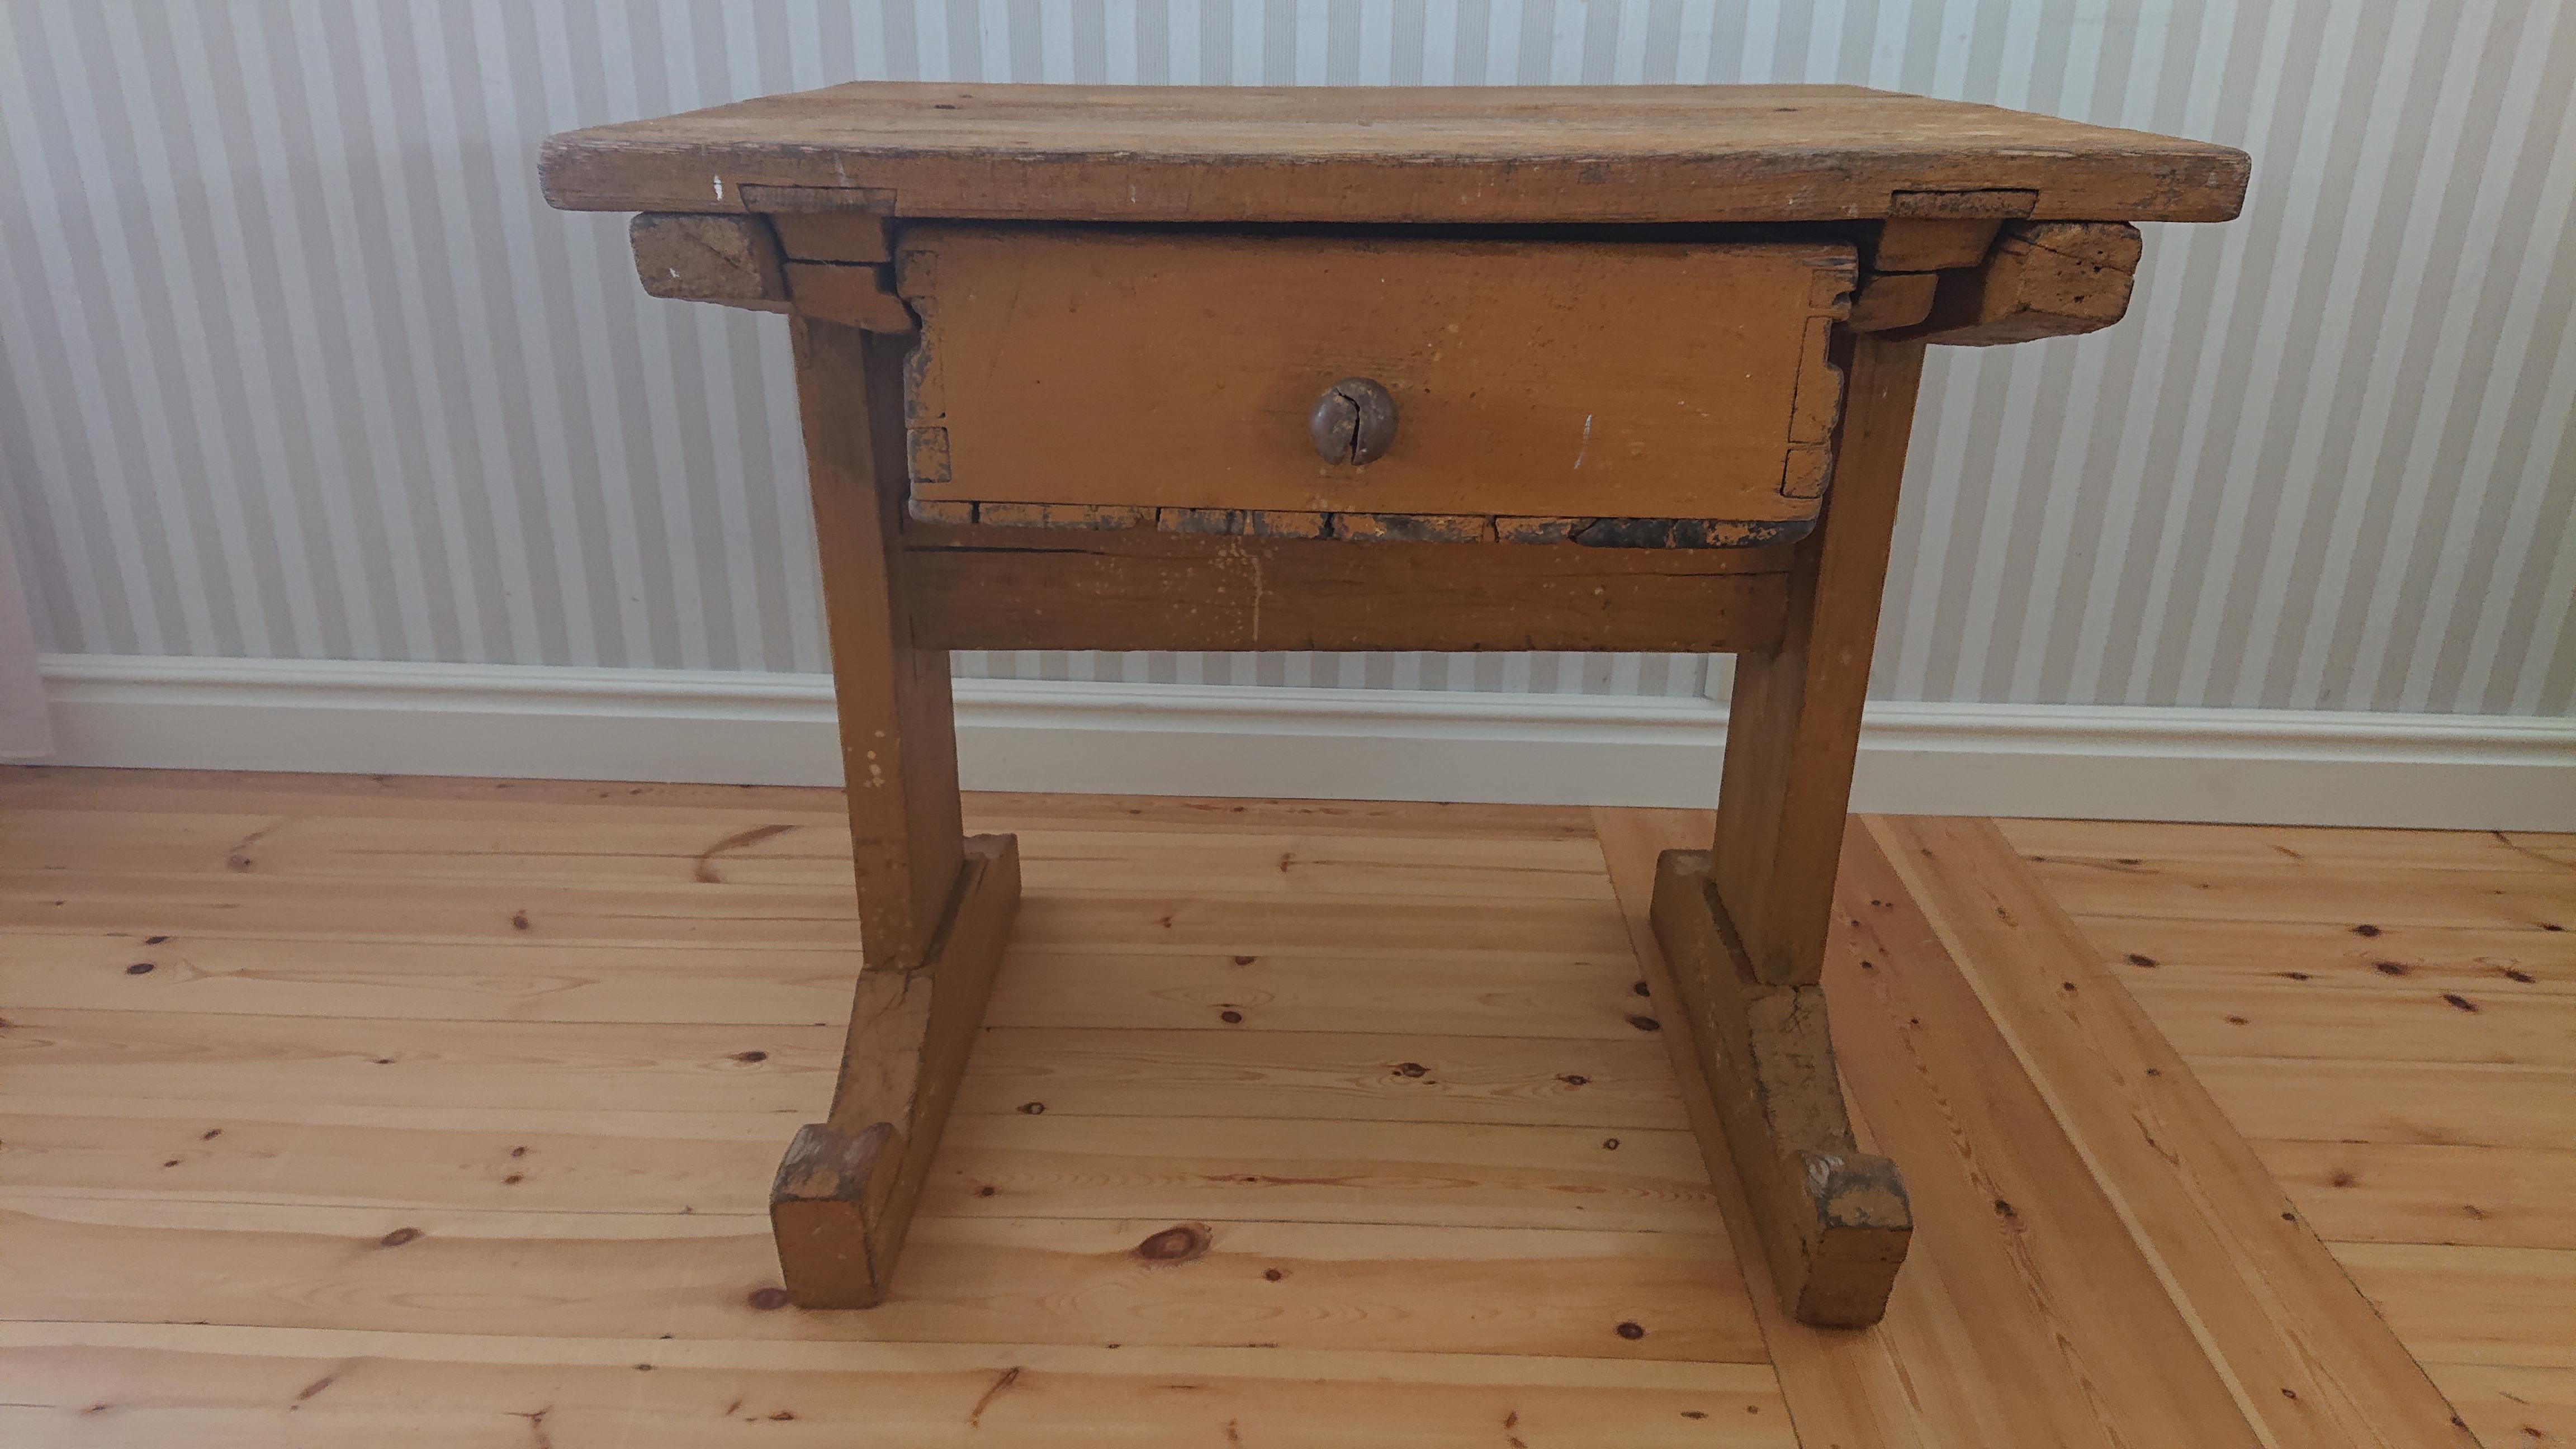 18th Century Swedish  antique rustic Folk Art Trestle table from Örnsköldsvik Ångermanland, Northern Sweden.
A very charming small and genuine table with a drawer
The table is dated 1766.
The paint is slightly distressed after over 250 years of